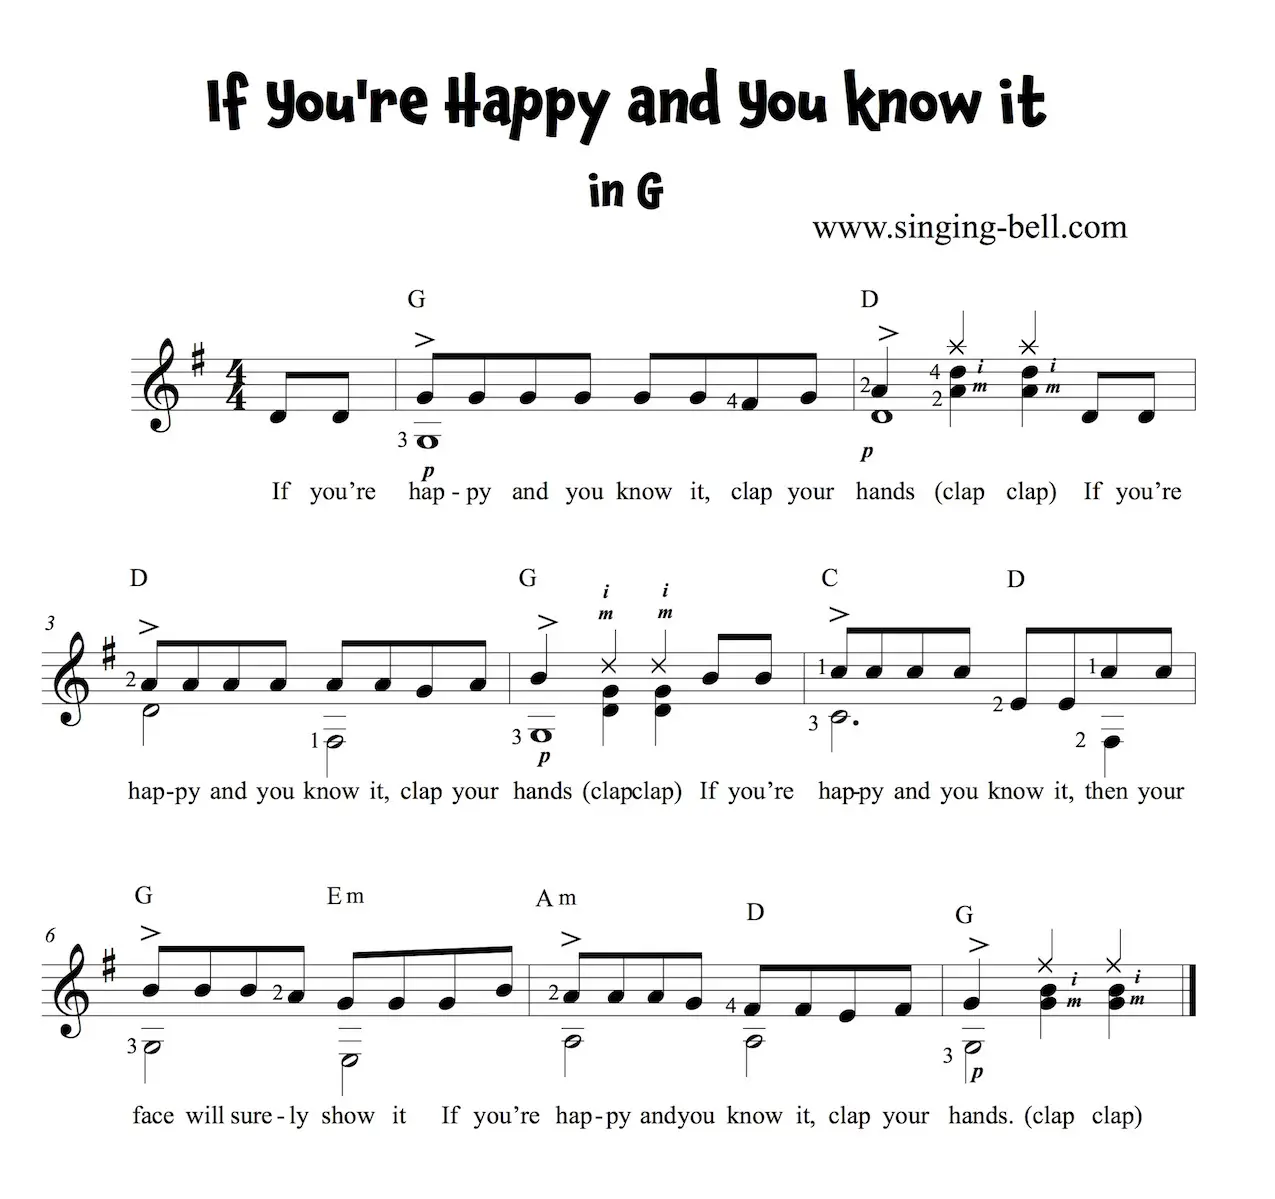 If You're Happy and You know it Easy Guitar Sheet Music in G.